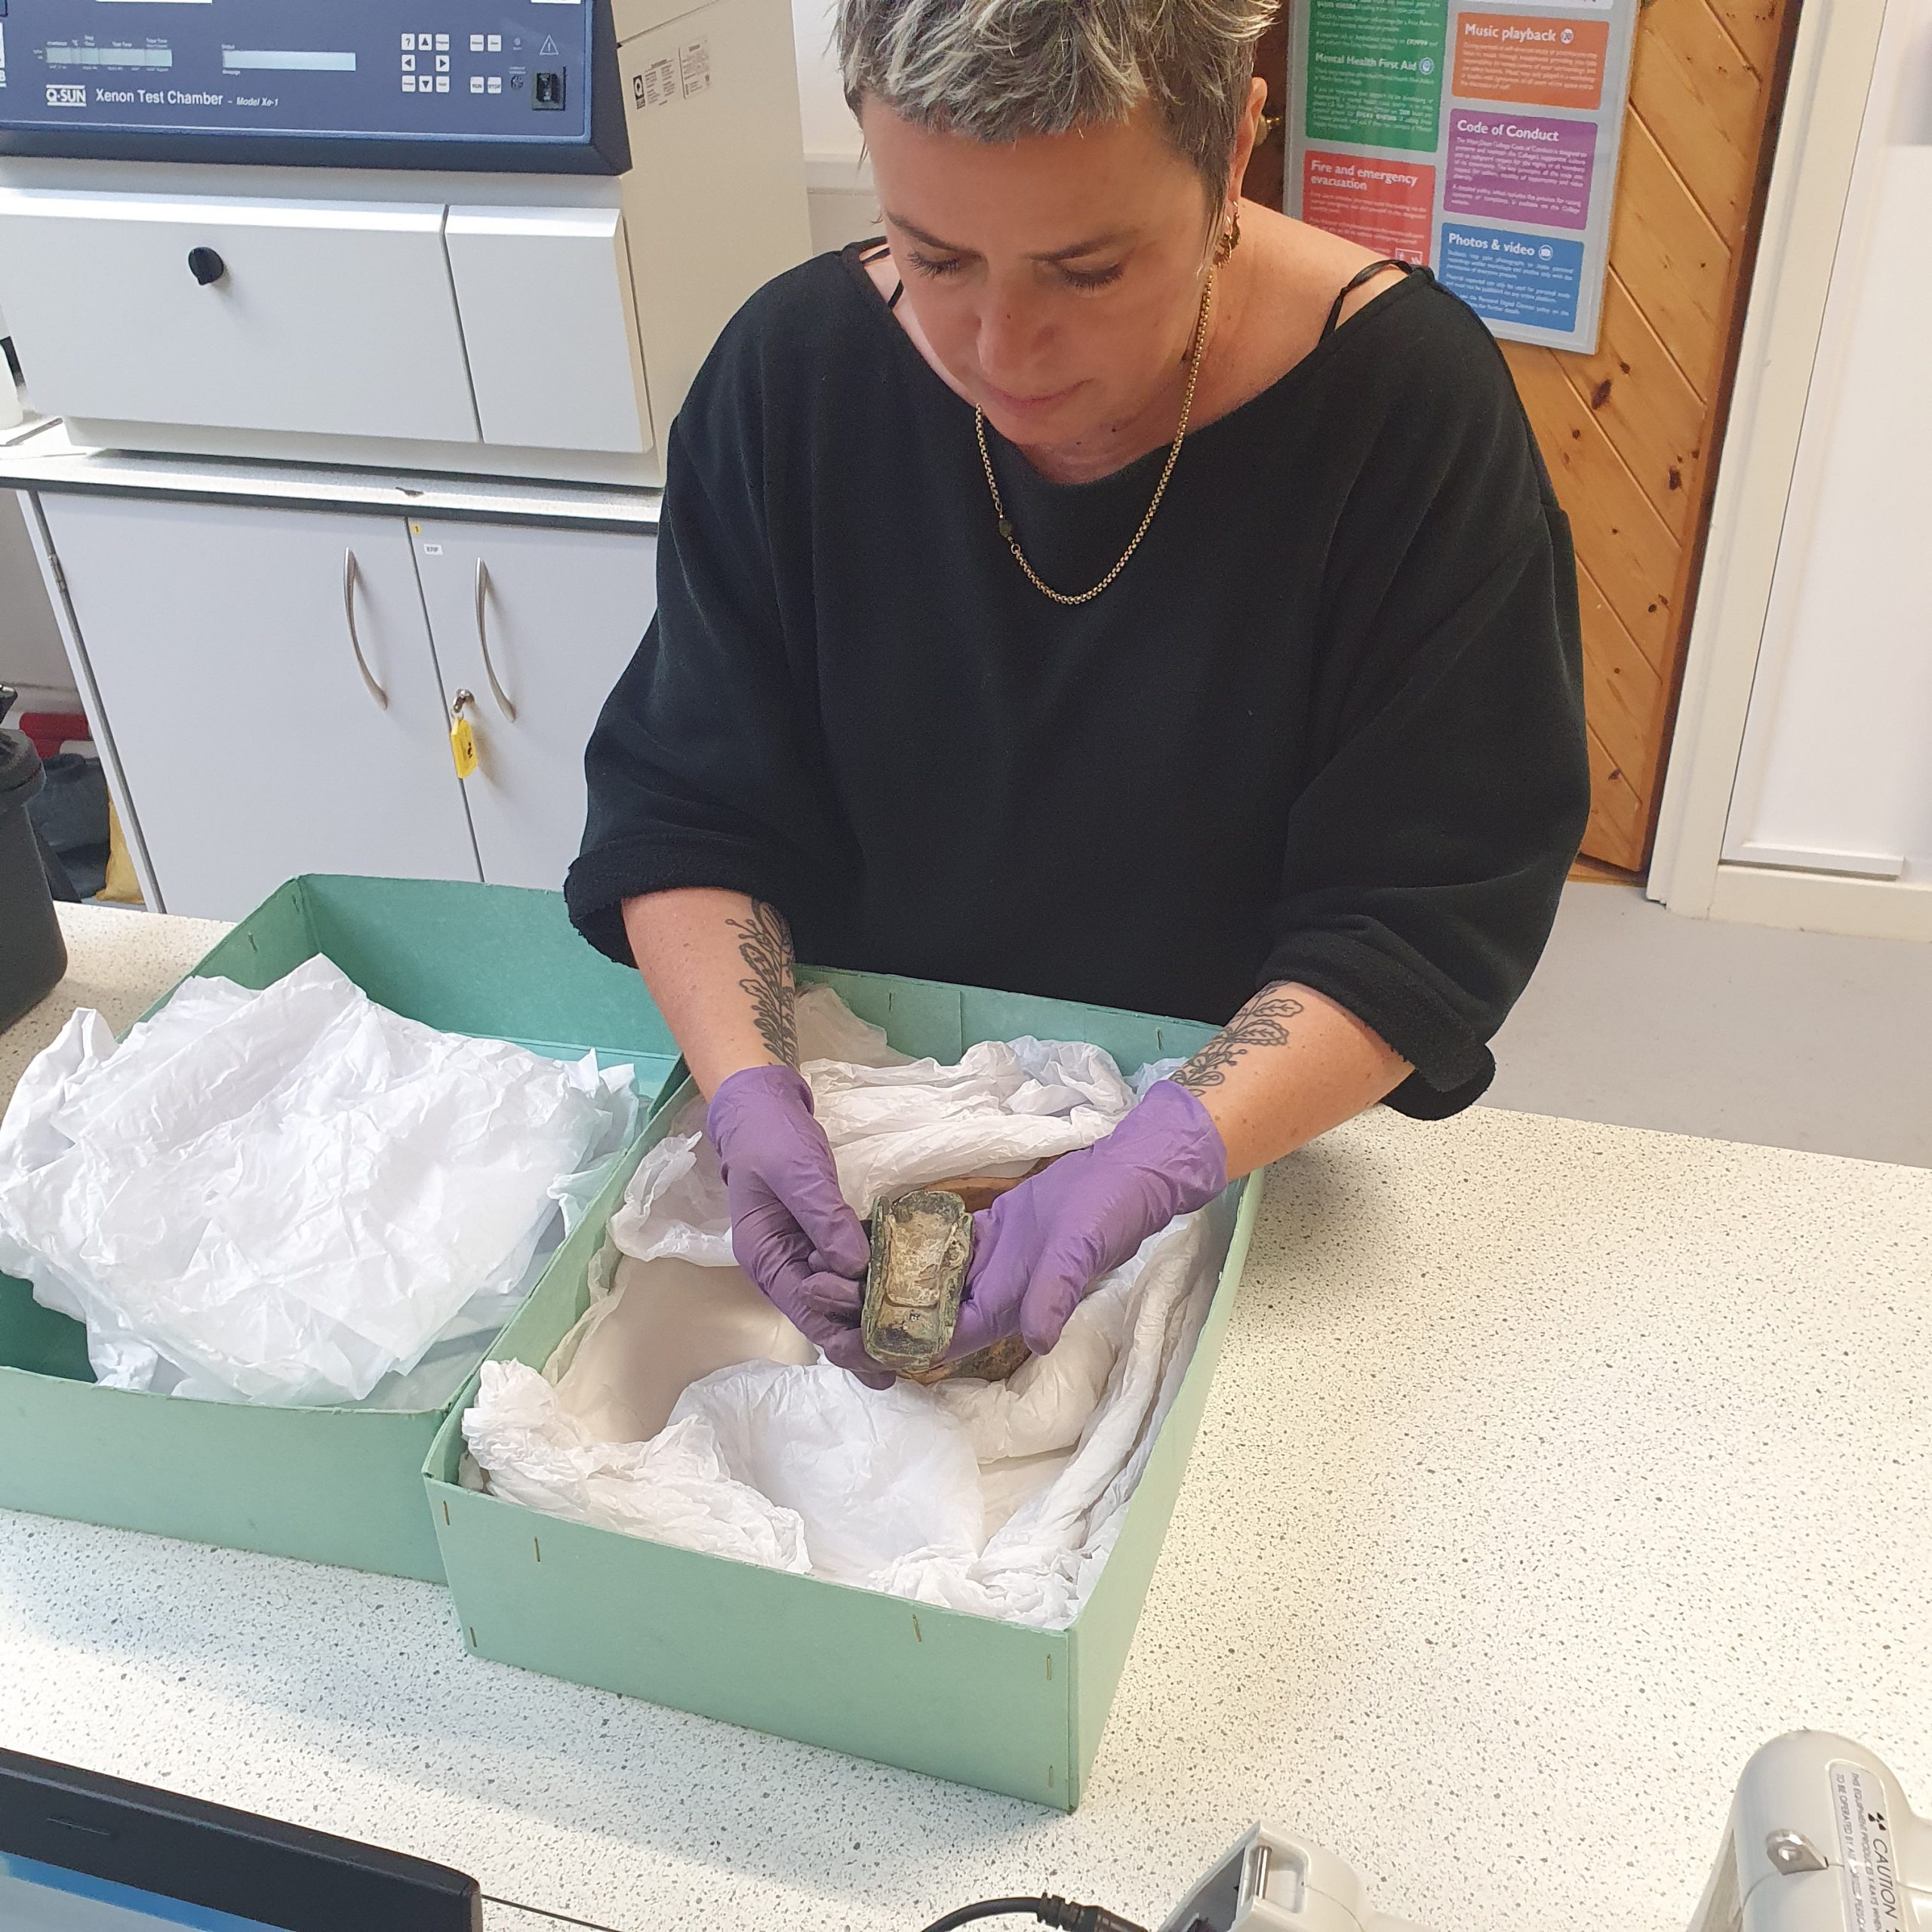 Collaboration with Worthing museum to complete analysis of objects.